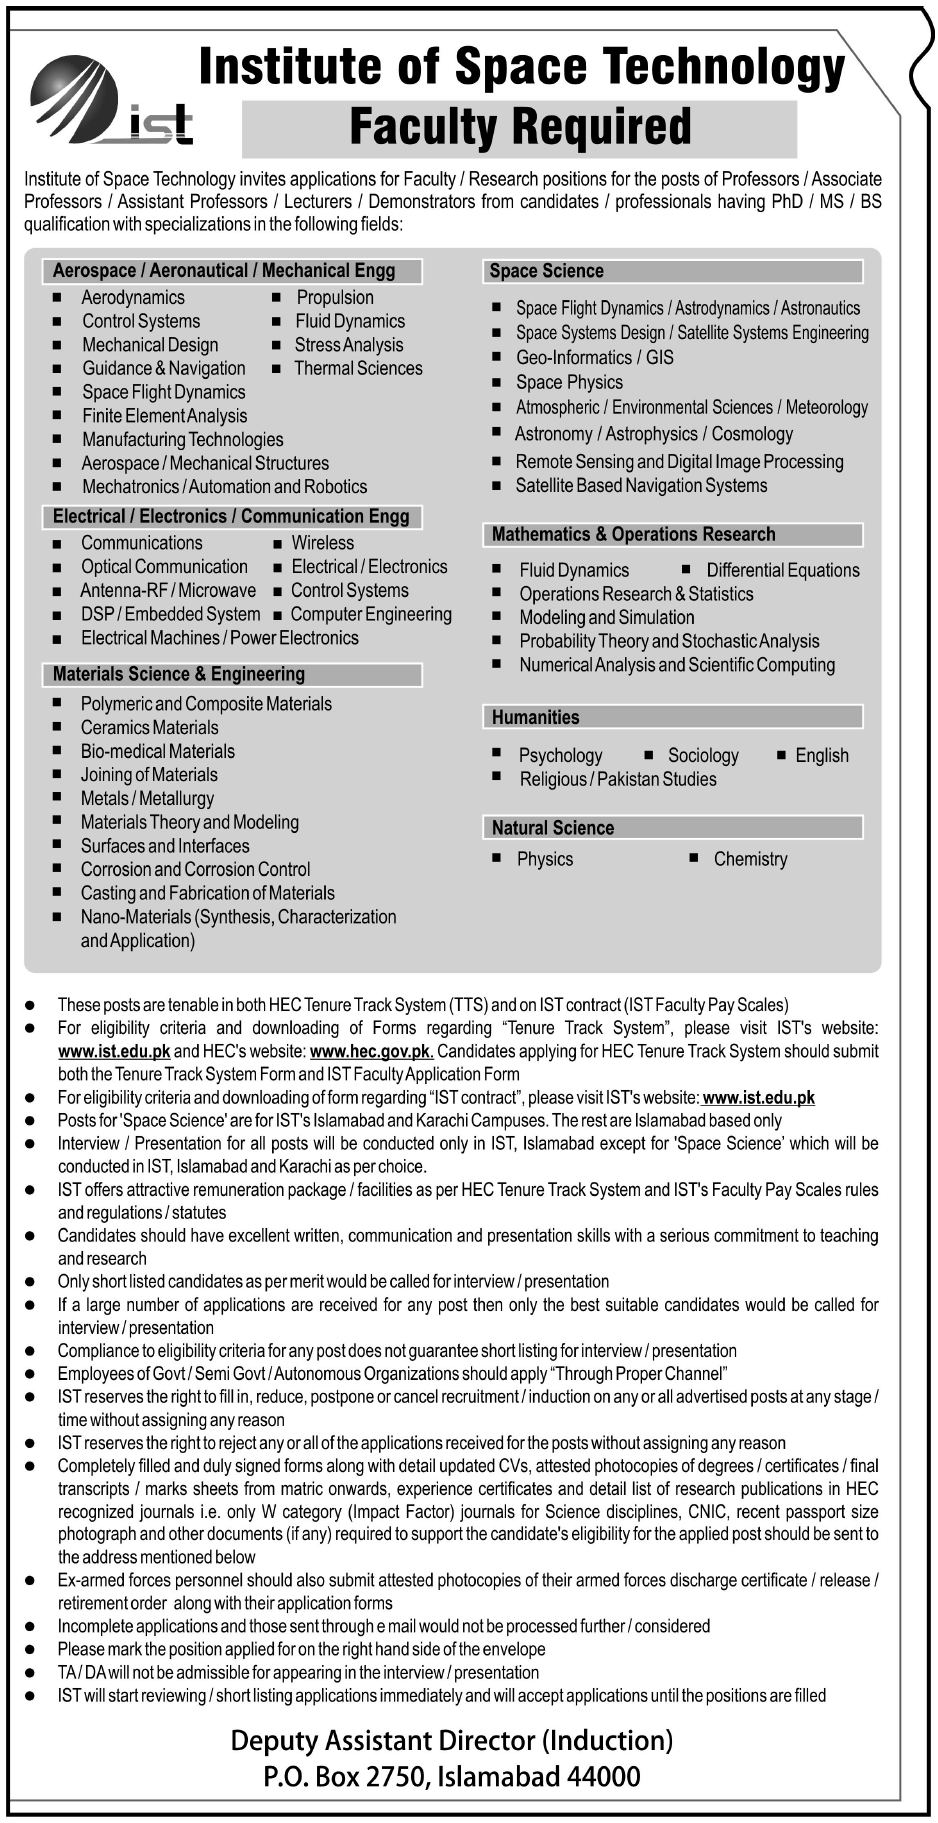 Institute of Space Technology Required Faculty